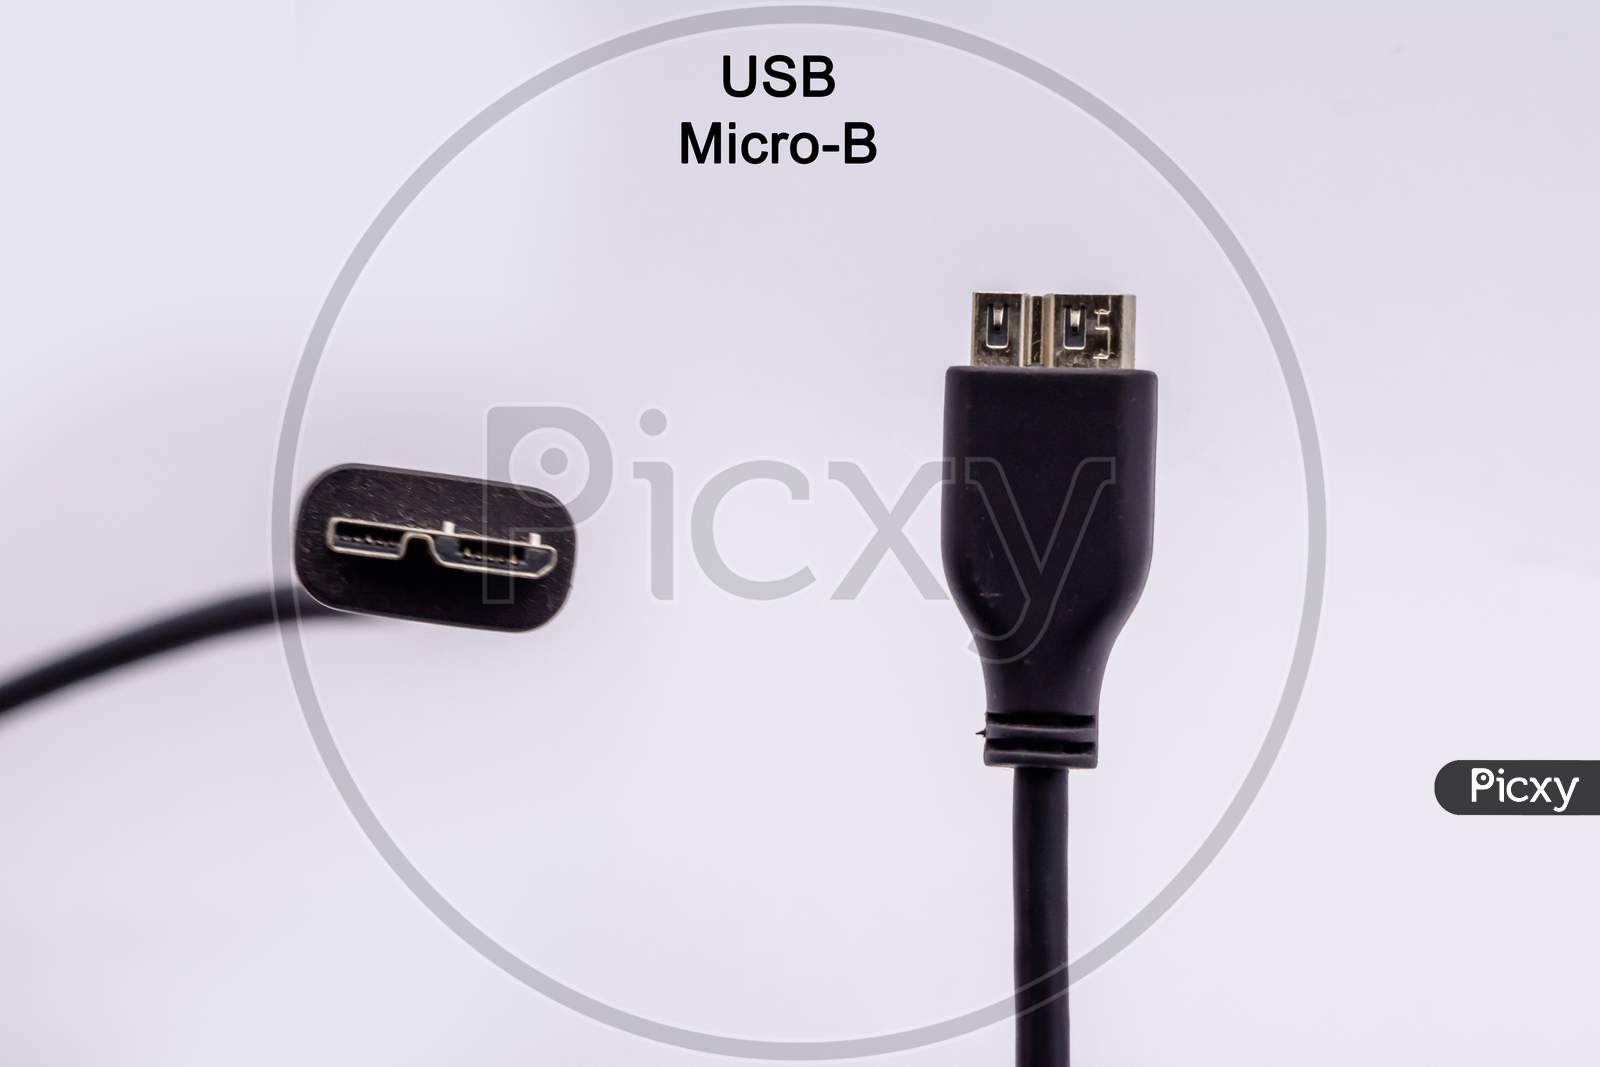 Micro Usb Type B Cable From Different Angles Isolated Against White Background. External Hard Disk Connector Cable